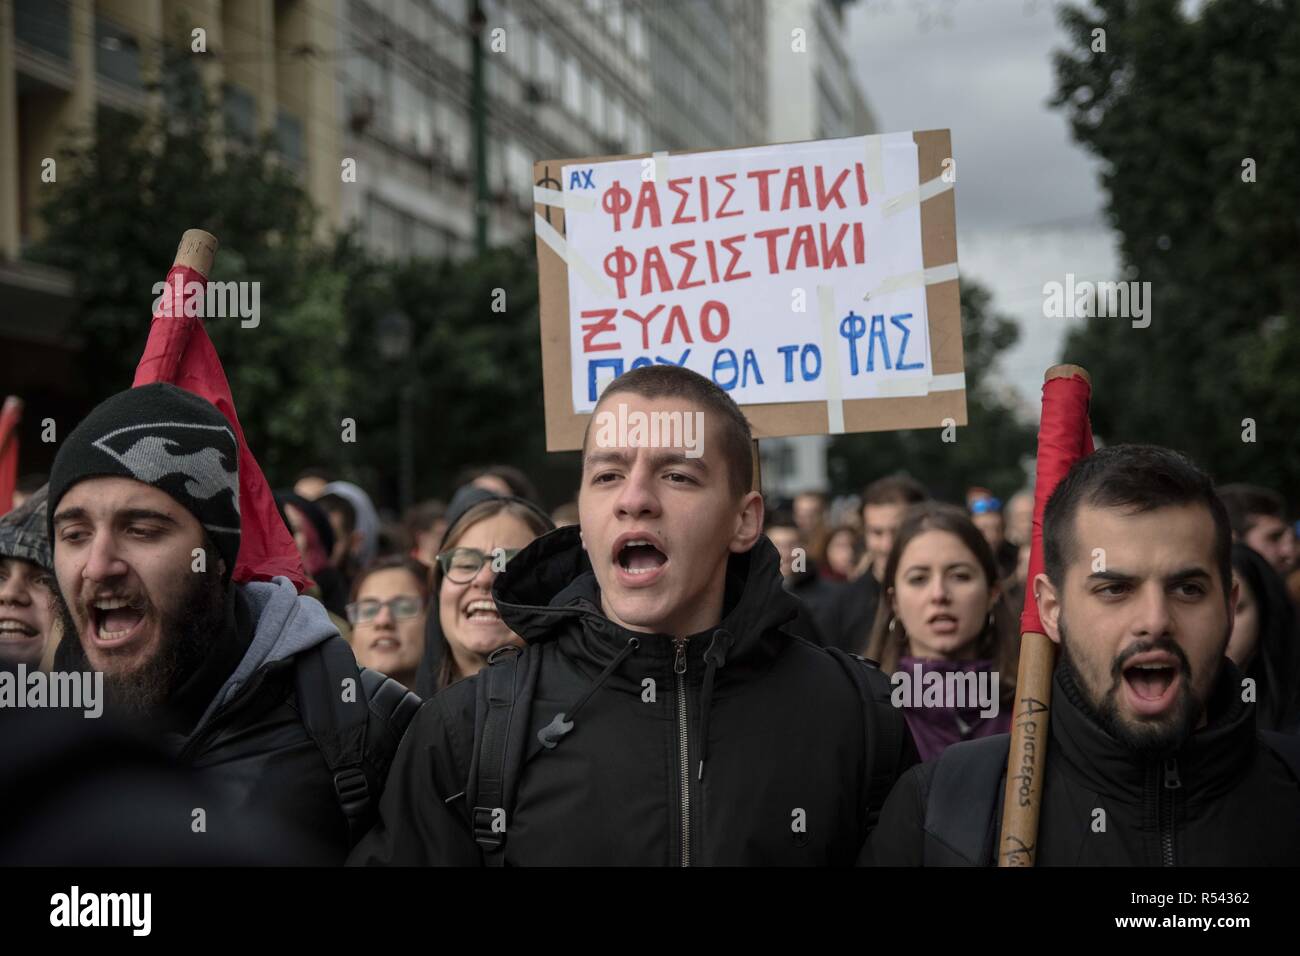 Athens, Greece. 29th Nov, 2018. Protesters are seen chanting slogans during the protest.Hundreds of students protest against the rise of fascism and racism in schools. Credit: Nikolas Joao Kokovlis/SOPA Images/ZUMA Wire/Alamy Live News Stock Photo